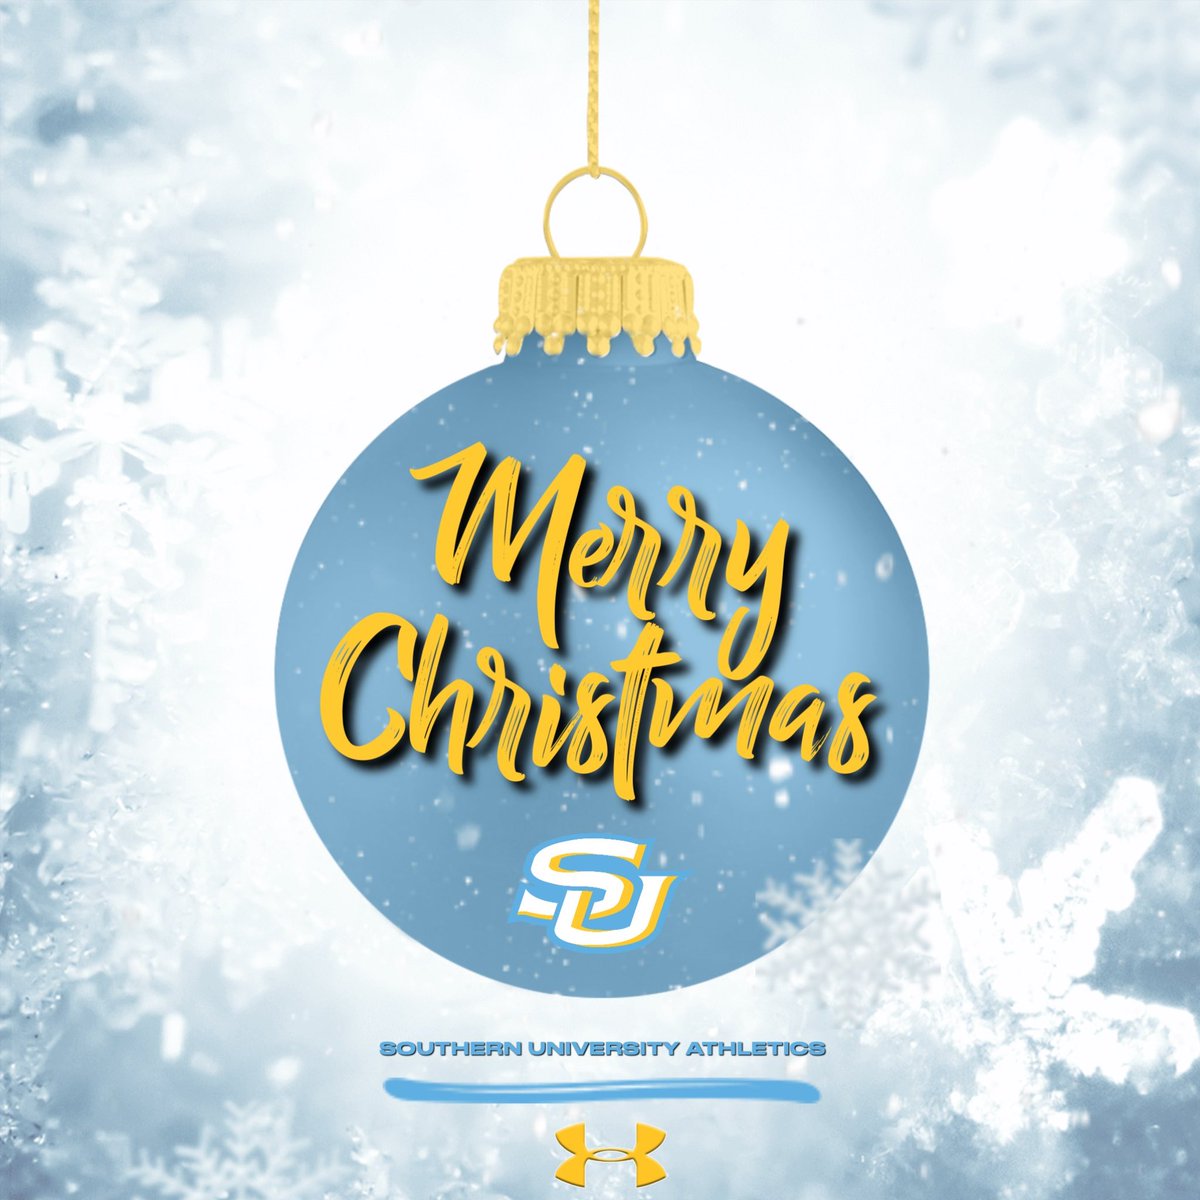 Merry Christmas and Happy Holidays from the Jaguars!!